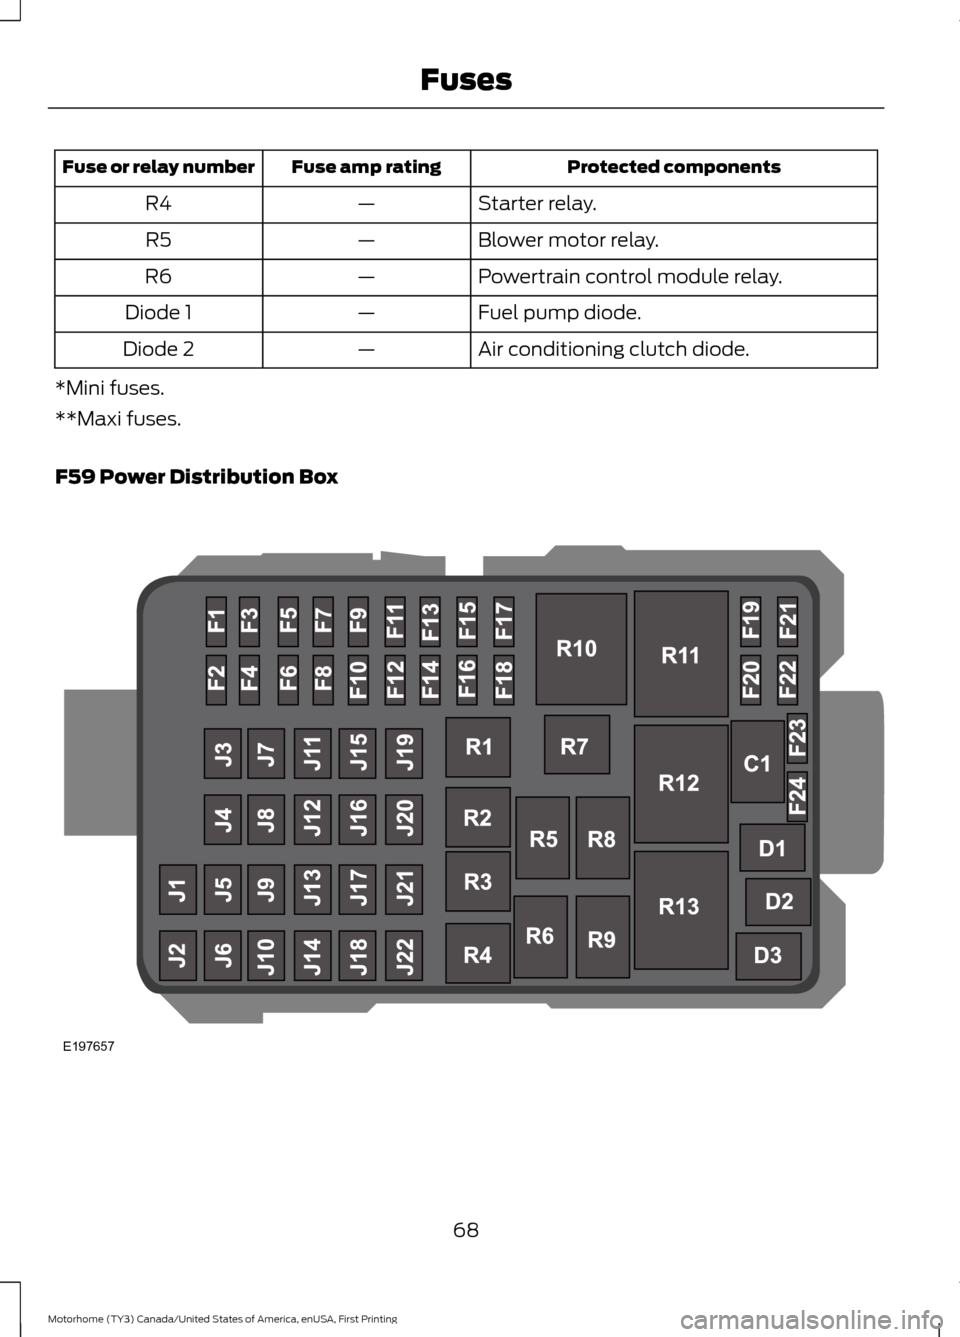 FORD F SERIES MOTORHOME AND COMMERCIAL CHASSIS 2017 13.G Owners Manual Protected components
Fuse amp rating
Fuse or relay number
Starter relay.
—
R4
Blower motor relay.
—
R5
Powertrain control module relay.
—
R6
Fuel pump diode.
—
Diode 1
Air conditioning clutch 